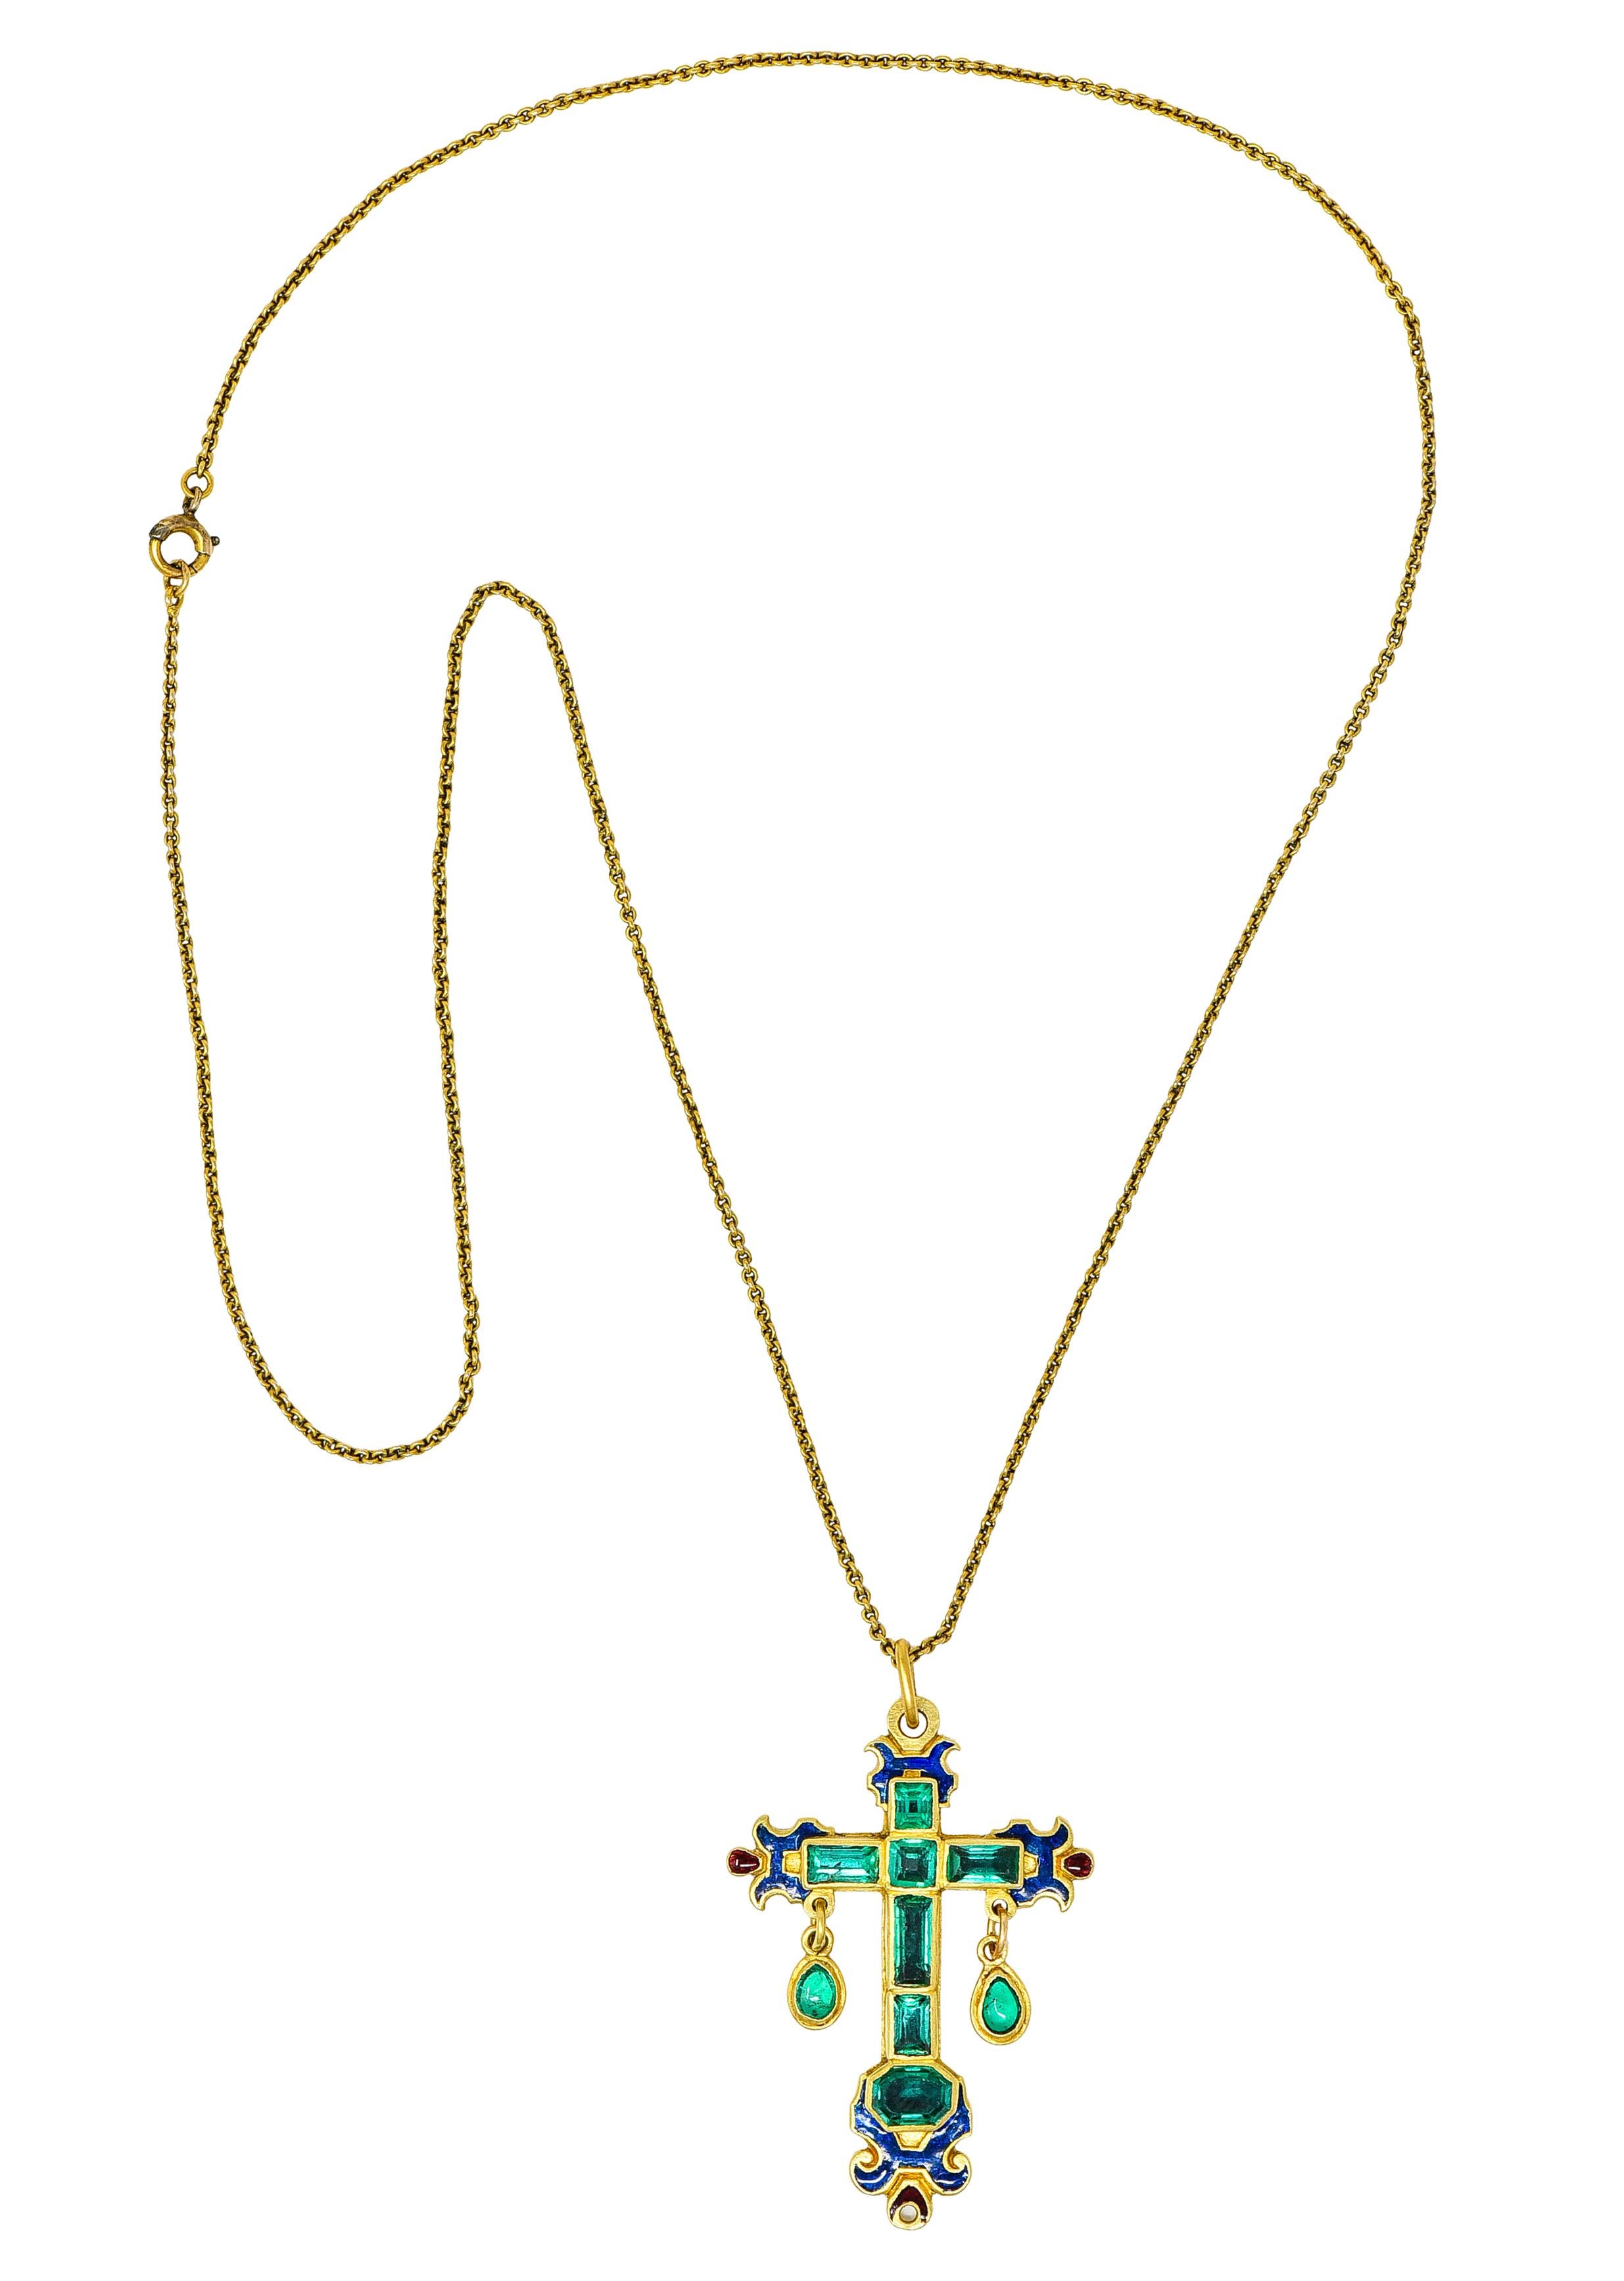 Cable chain necklace suspends a substantial cross shaped pendant accented by articulated drops

Set with emerald cut, cabochon cut, octagonal cut and square cut emeralds

Weighing collectively approximately 2.80 carats - well matched in slightly